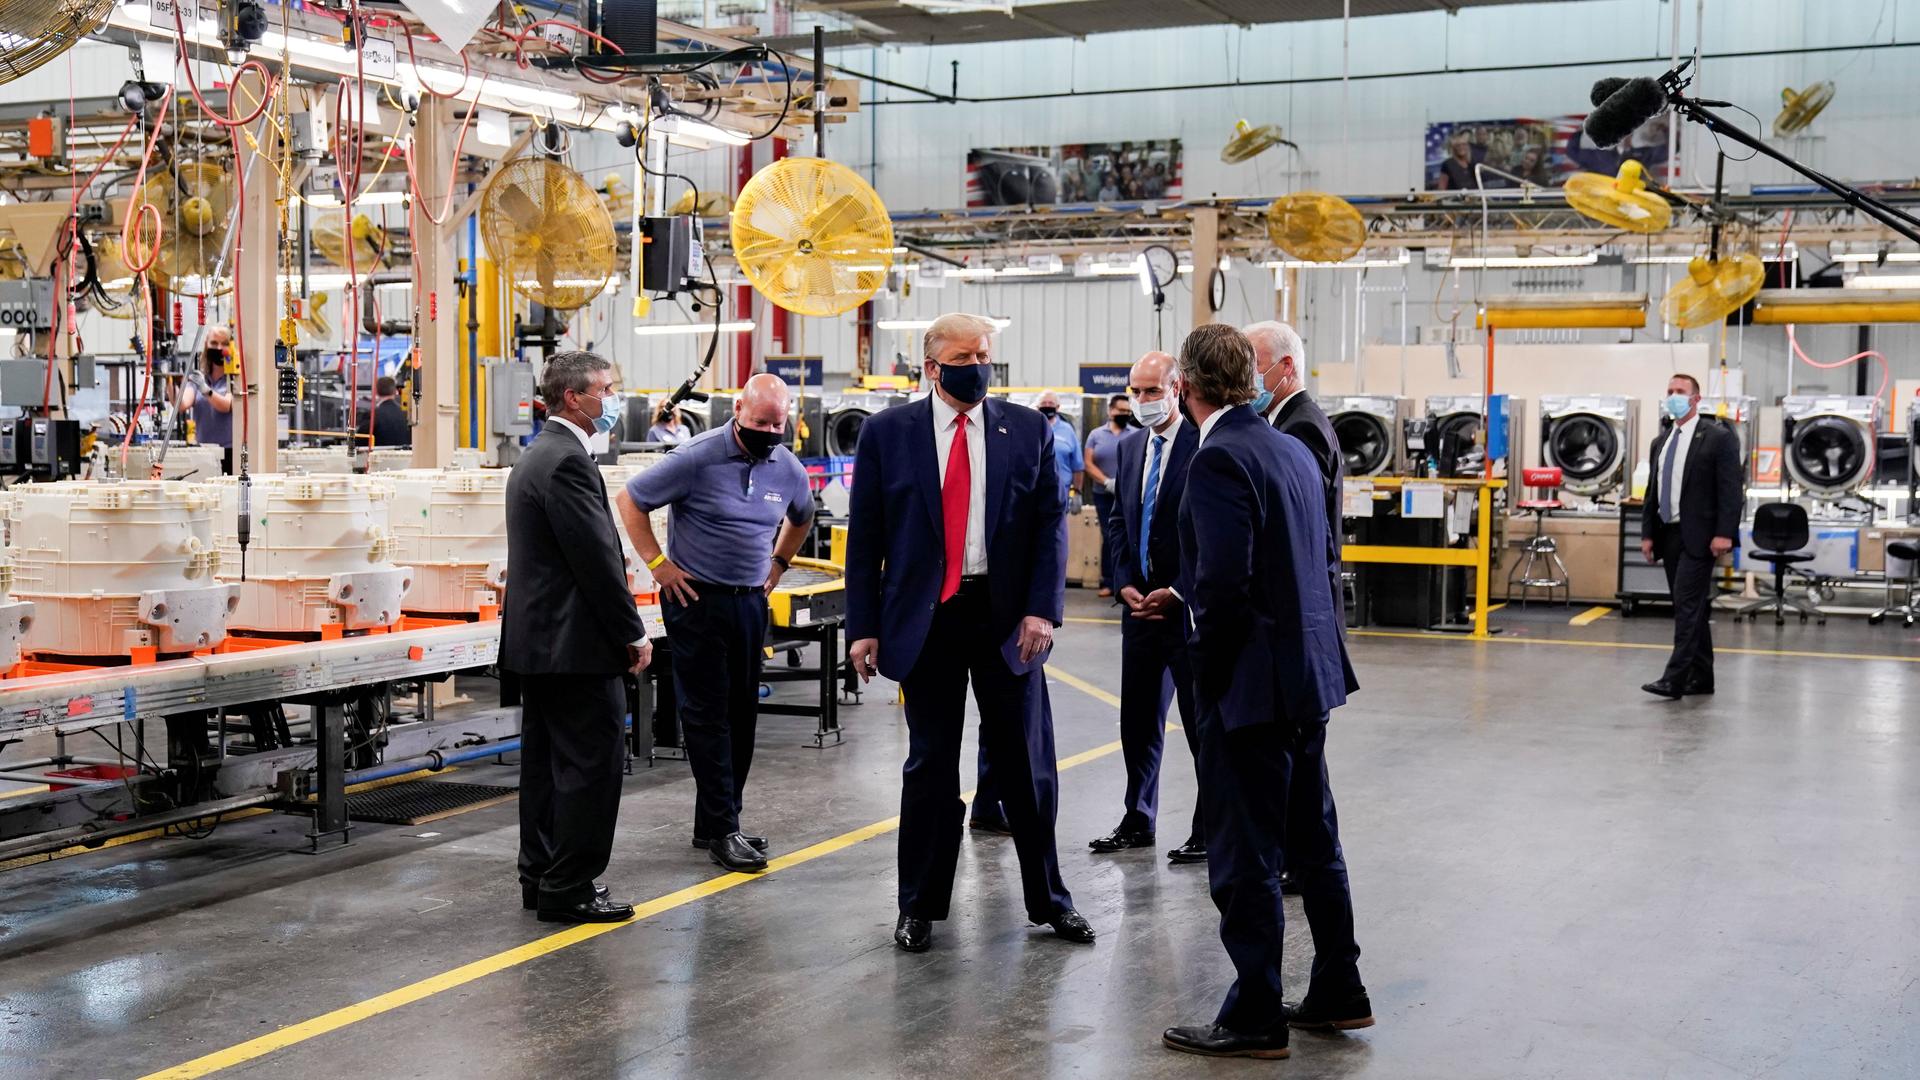 US President Donald Trump wears a protective face mask due to the coronavirus disease (COVID-19) pandemic as he tours the assembly line at a Whirlpool Corporation washing machine factory in Clyde, Ohio, Aug. 6, 2020.